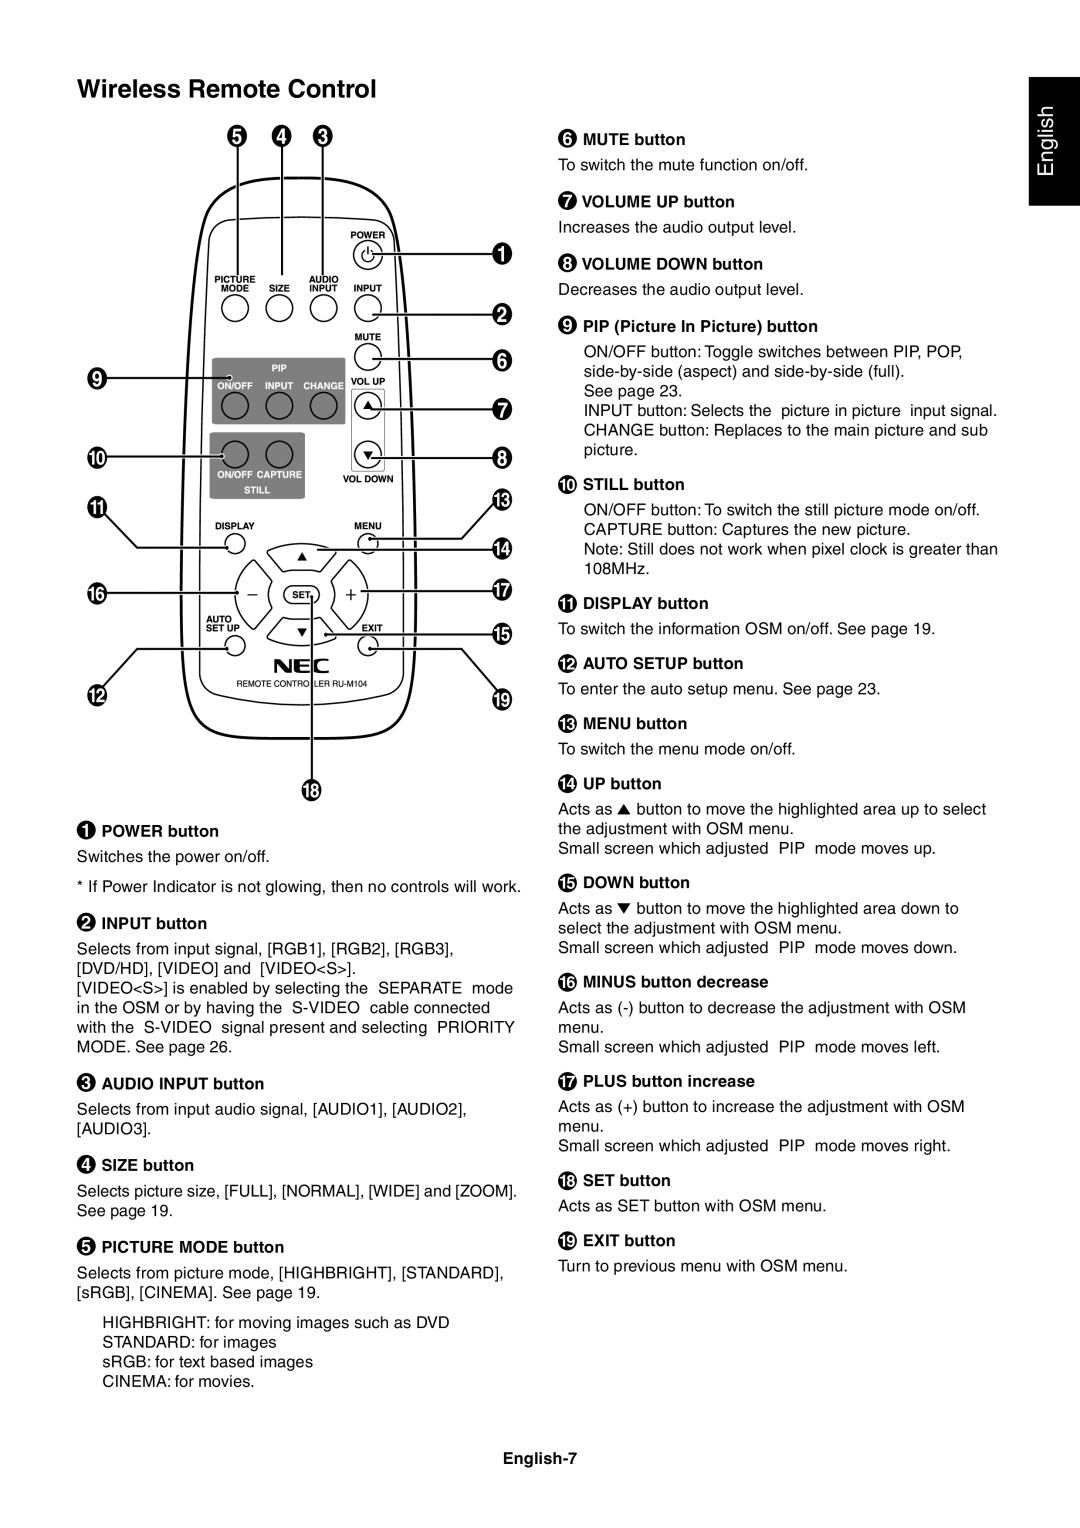 NEC LCD4010, LCD4610, LCD4610, LCD4610 user manual Wireless Remote Control 